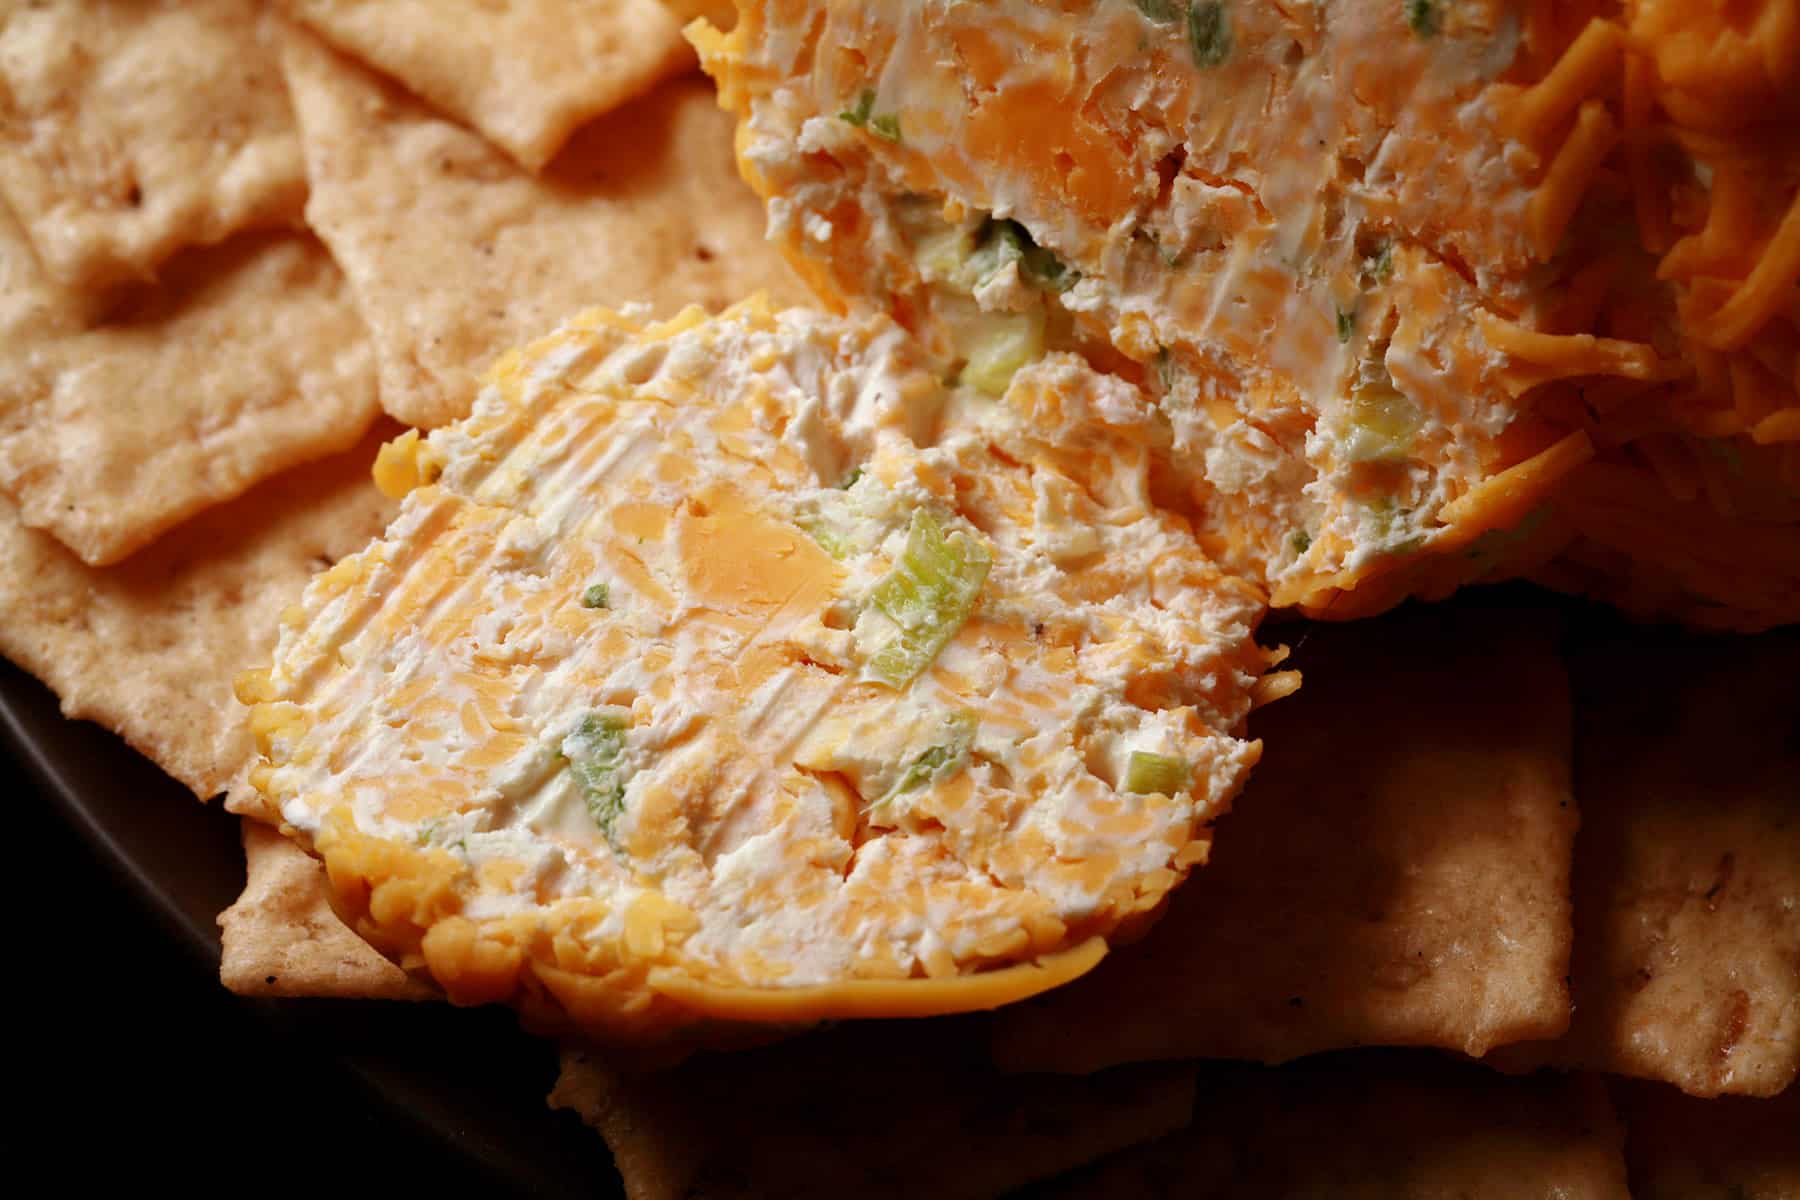 A slice of cheese ball, showing cream cheese, cheddar and green onions.